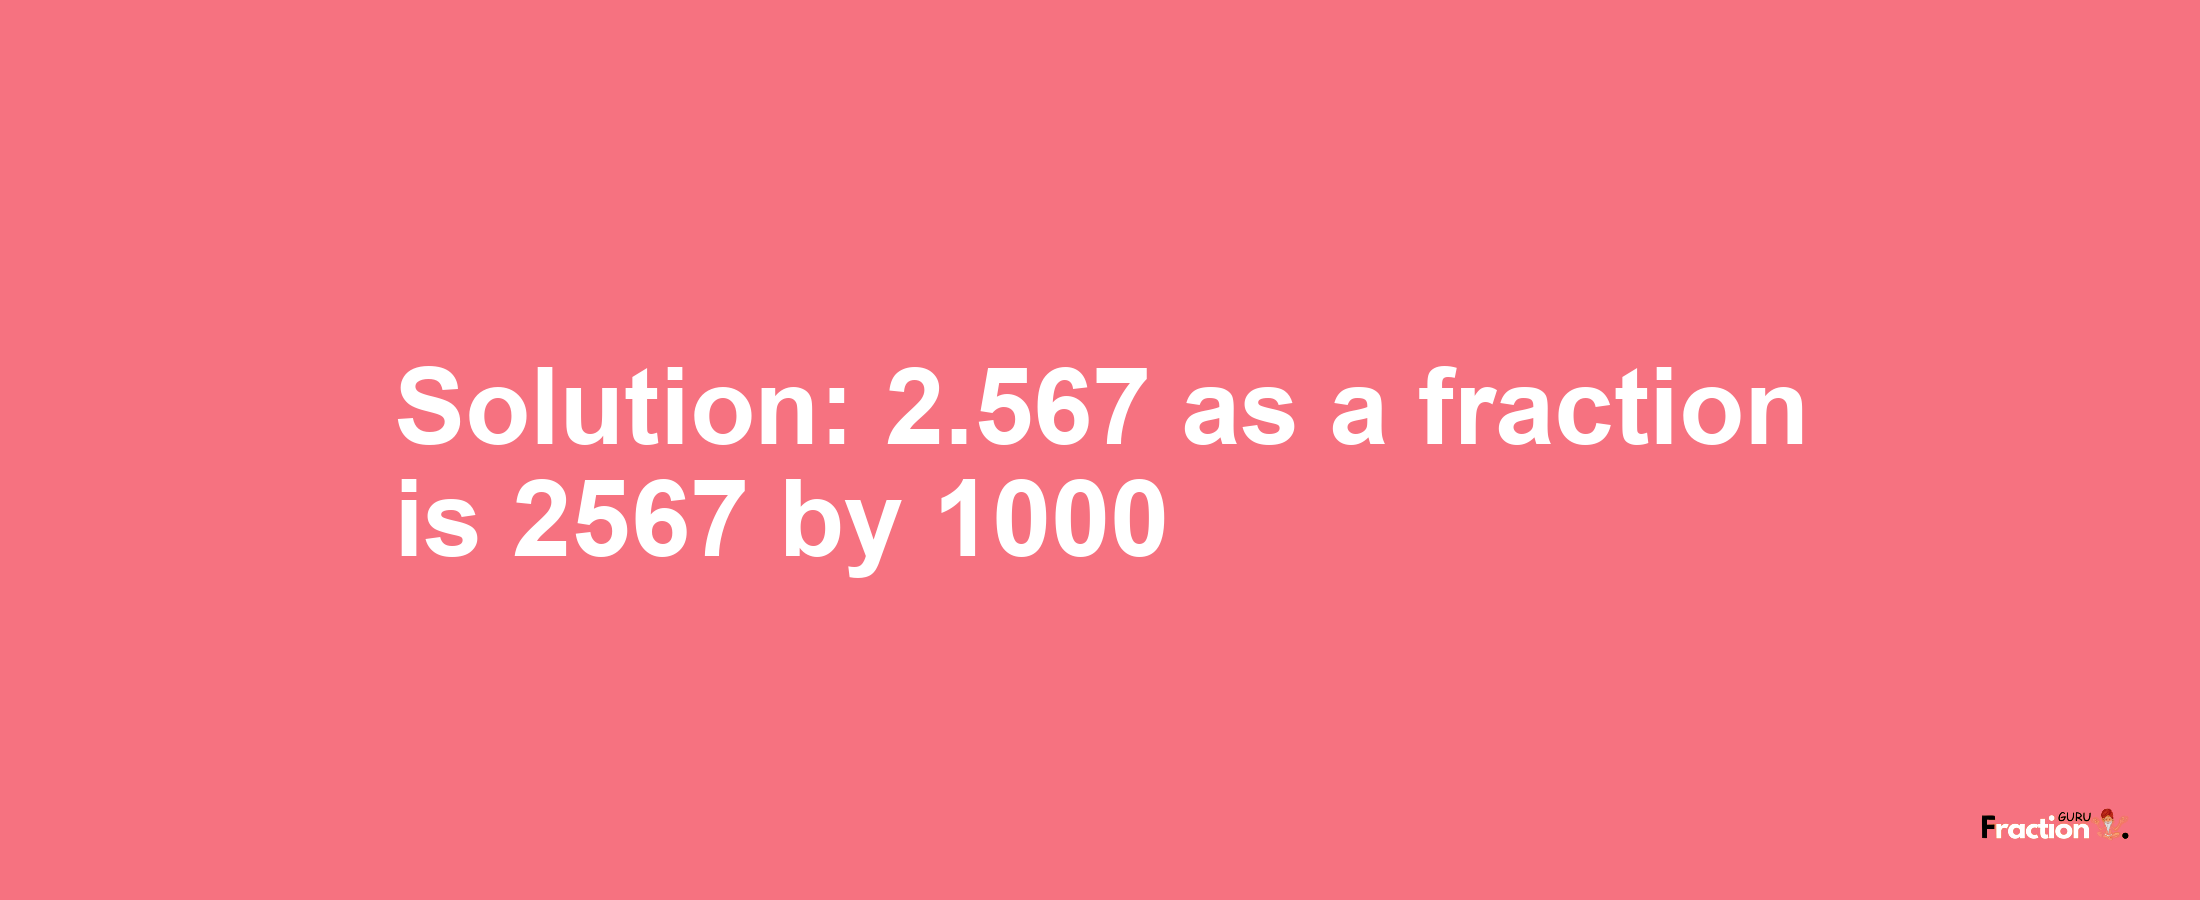 Solution:2.567 as a fraction is 2567/1000